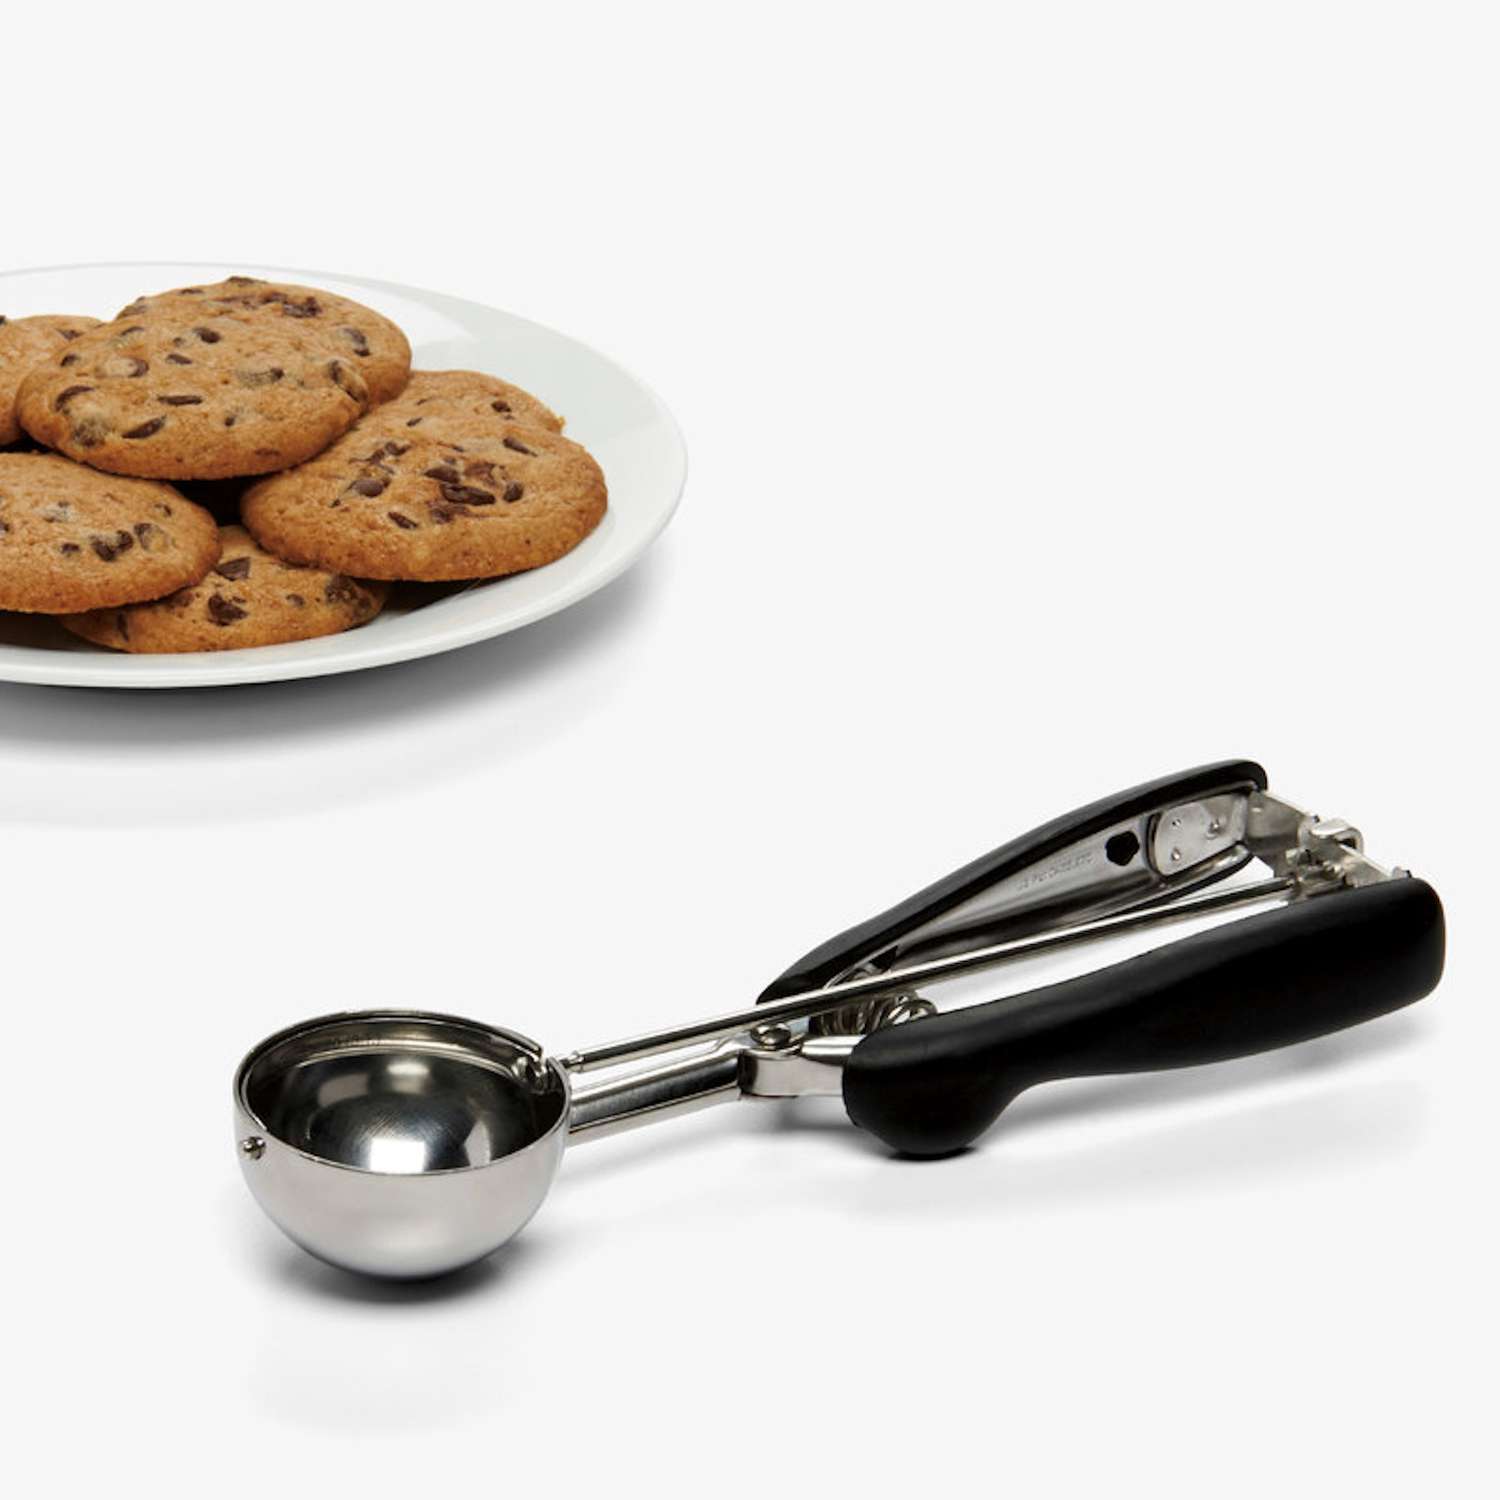 OXO Good Grips 14-Piece Cookie Press Set for sale online